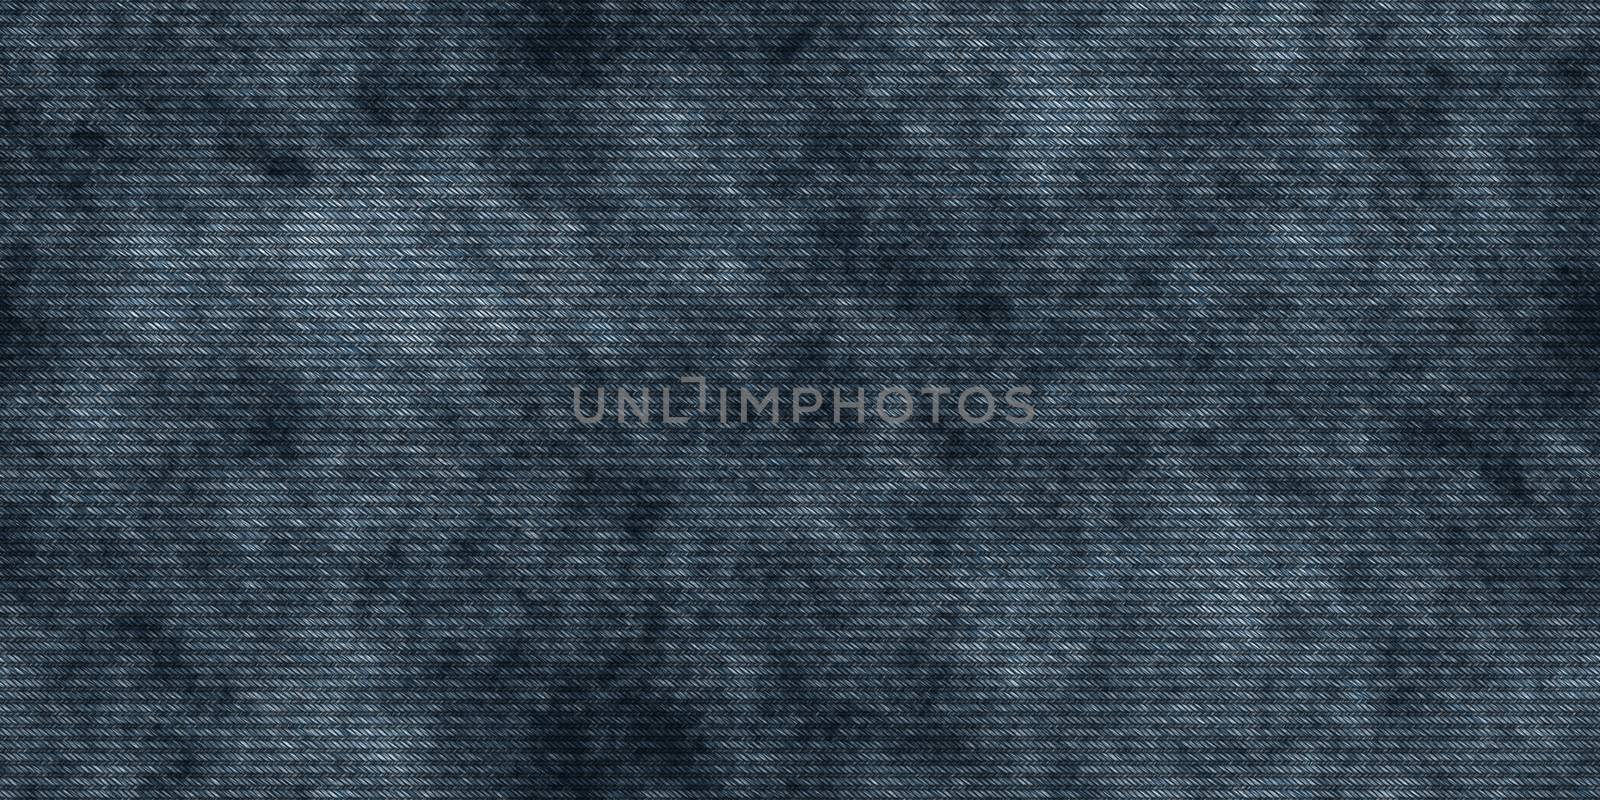 Jeans Denim Seamless Textures. Textile Fabric Background. Jeans Clothing Material Surface. Grunge Wear Pattern. by sanches812